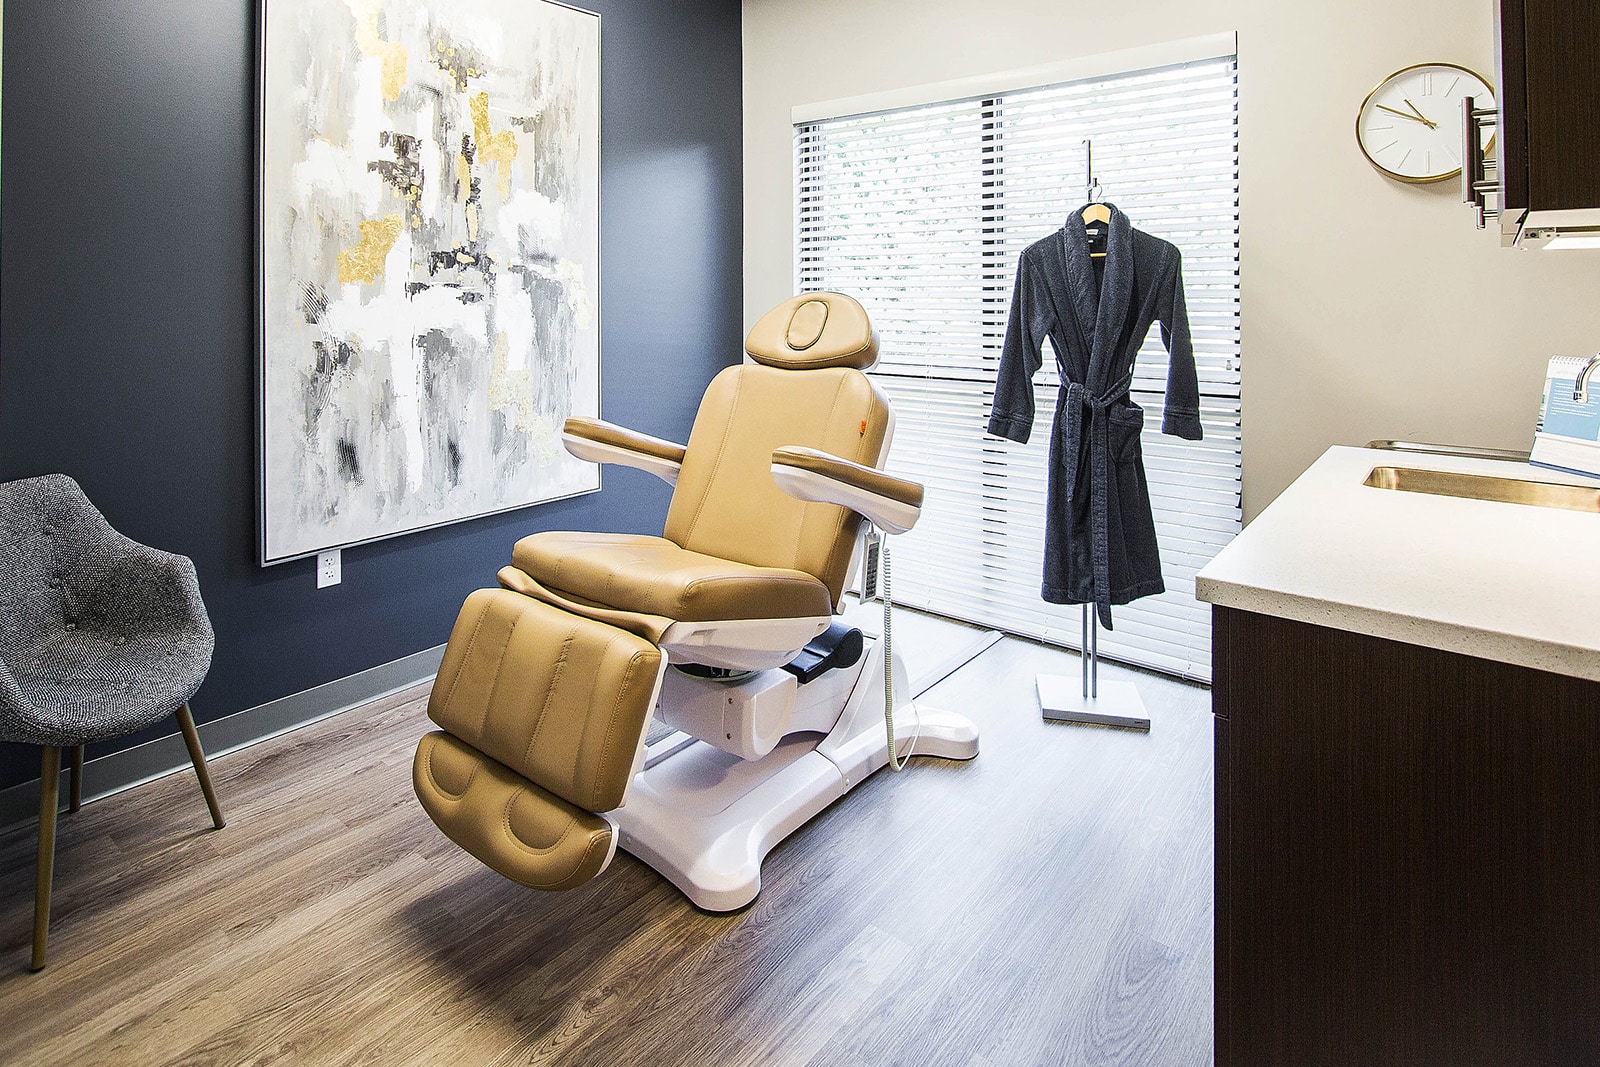 RejuvenationMD opens in Bothell, Washington